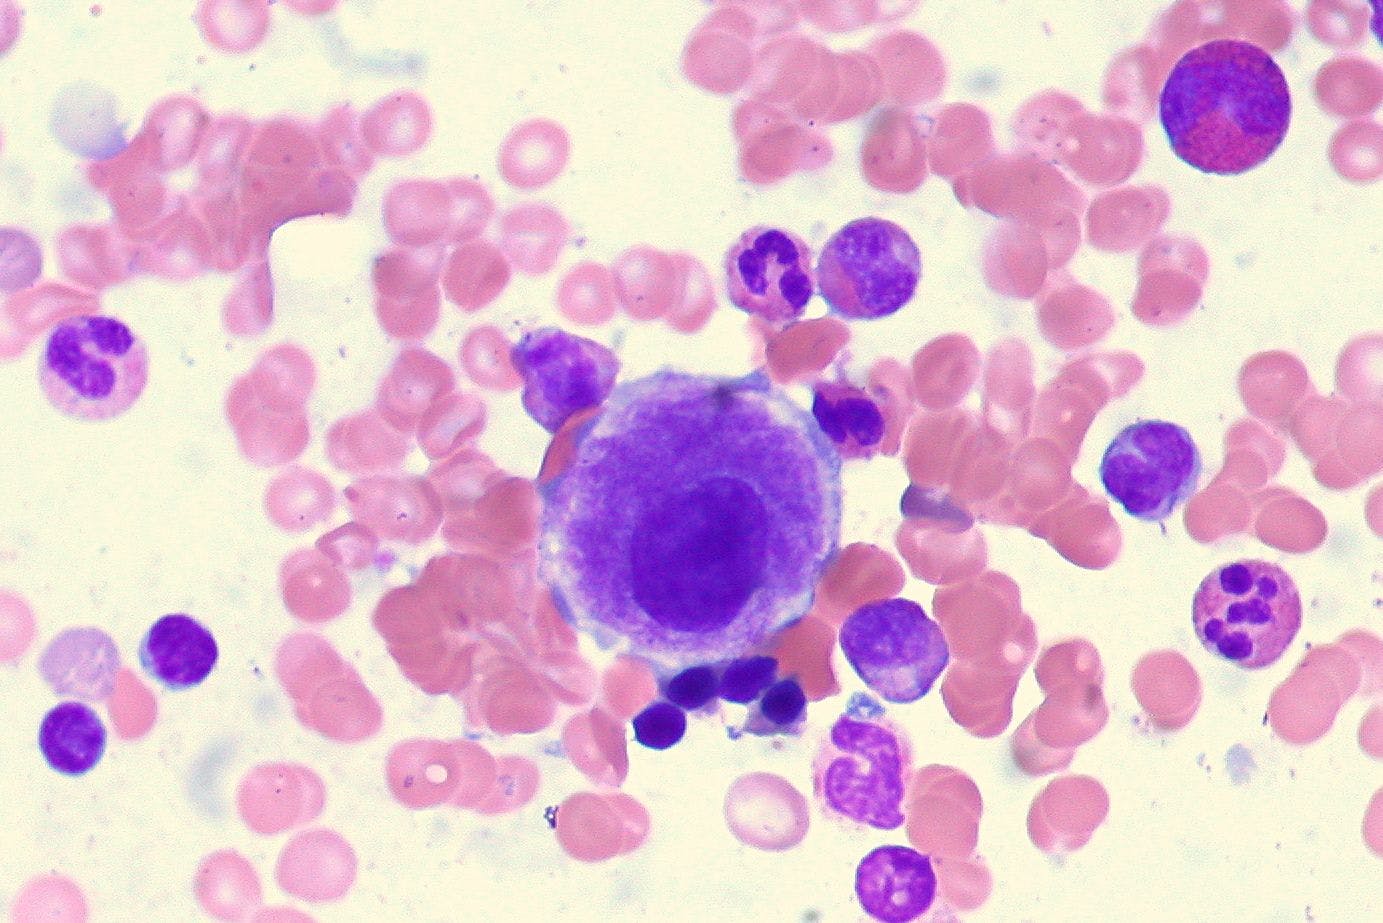 Investigators note that although therapy-related myelodysplastic syndromes or acute myeloid leukemia are not common, efforts to reduce treatment-associated toxicity in survivors of lymphoid neoplasms are needed given the poor prognosis associated with the diagnosis.